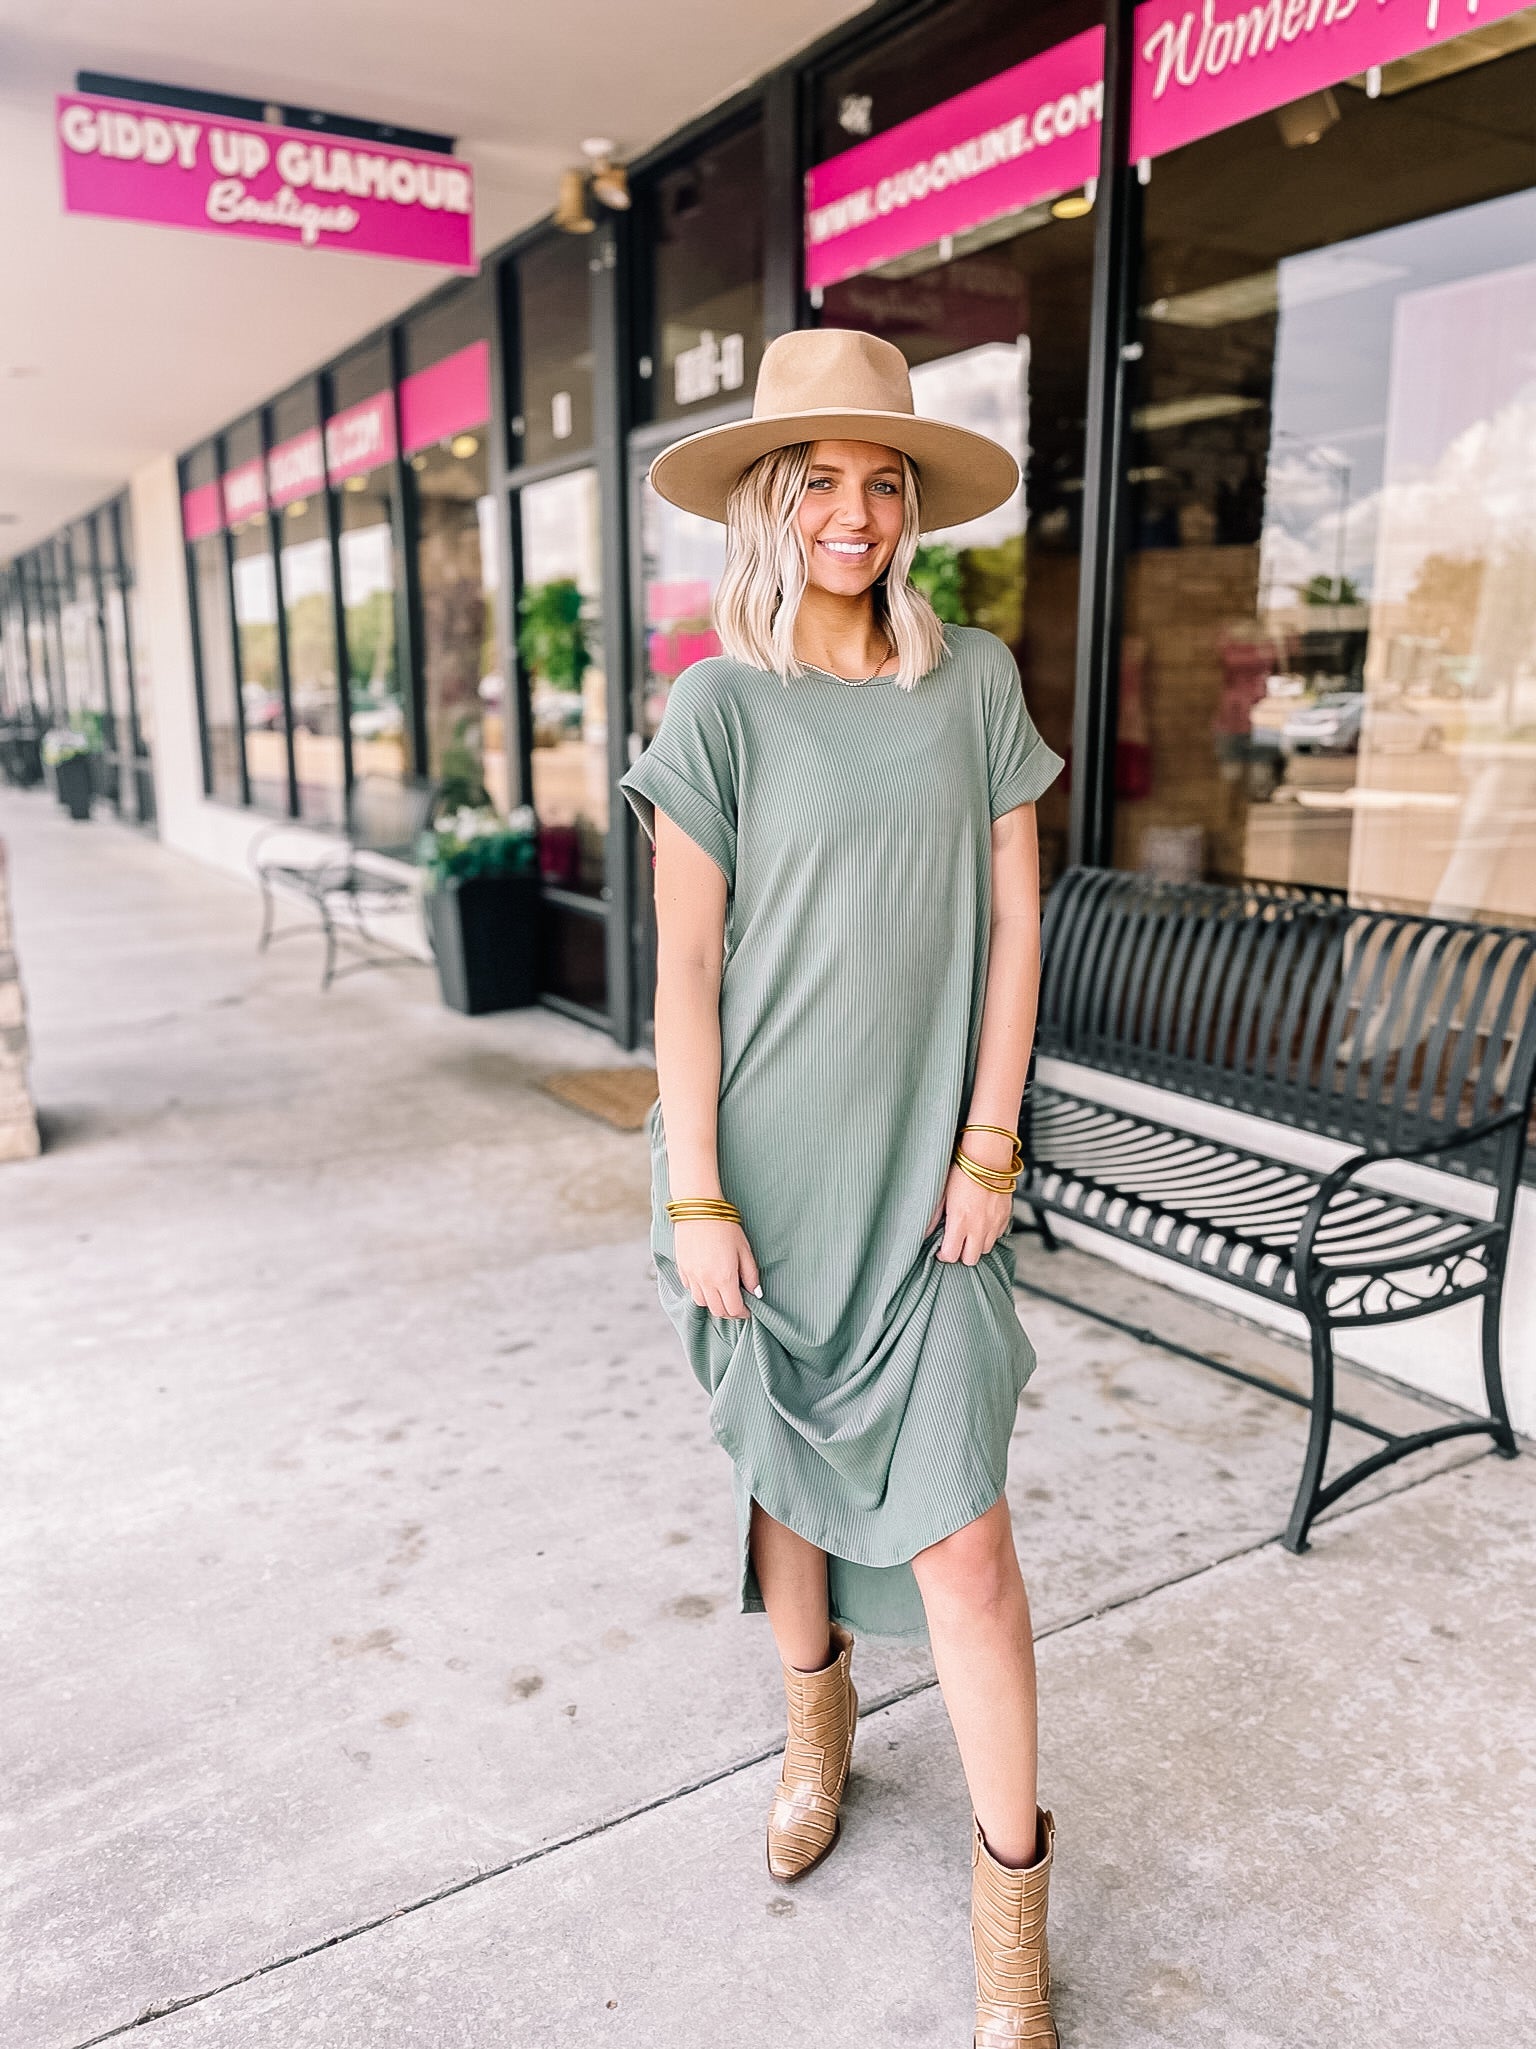 Chill Looks Short Sleeve Thin Ribbed Midi Dress in Olive Green - Giddy Up Glamour Boutique